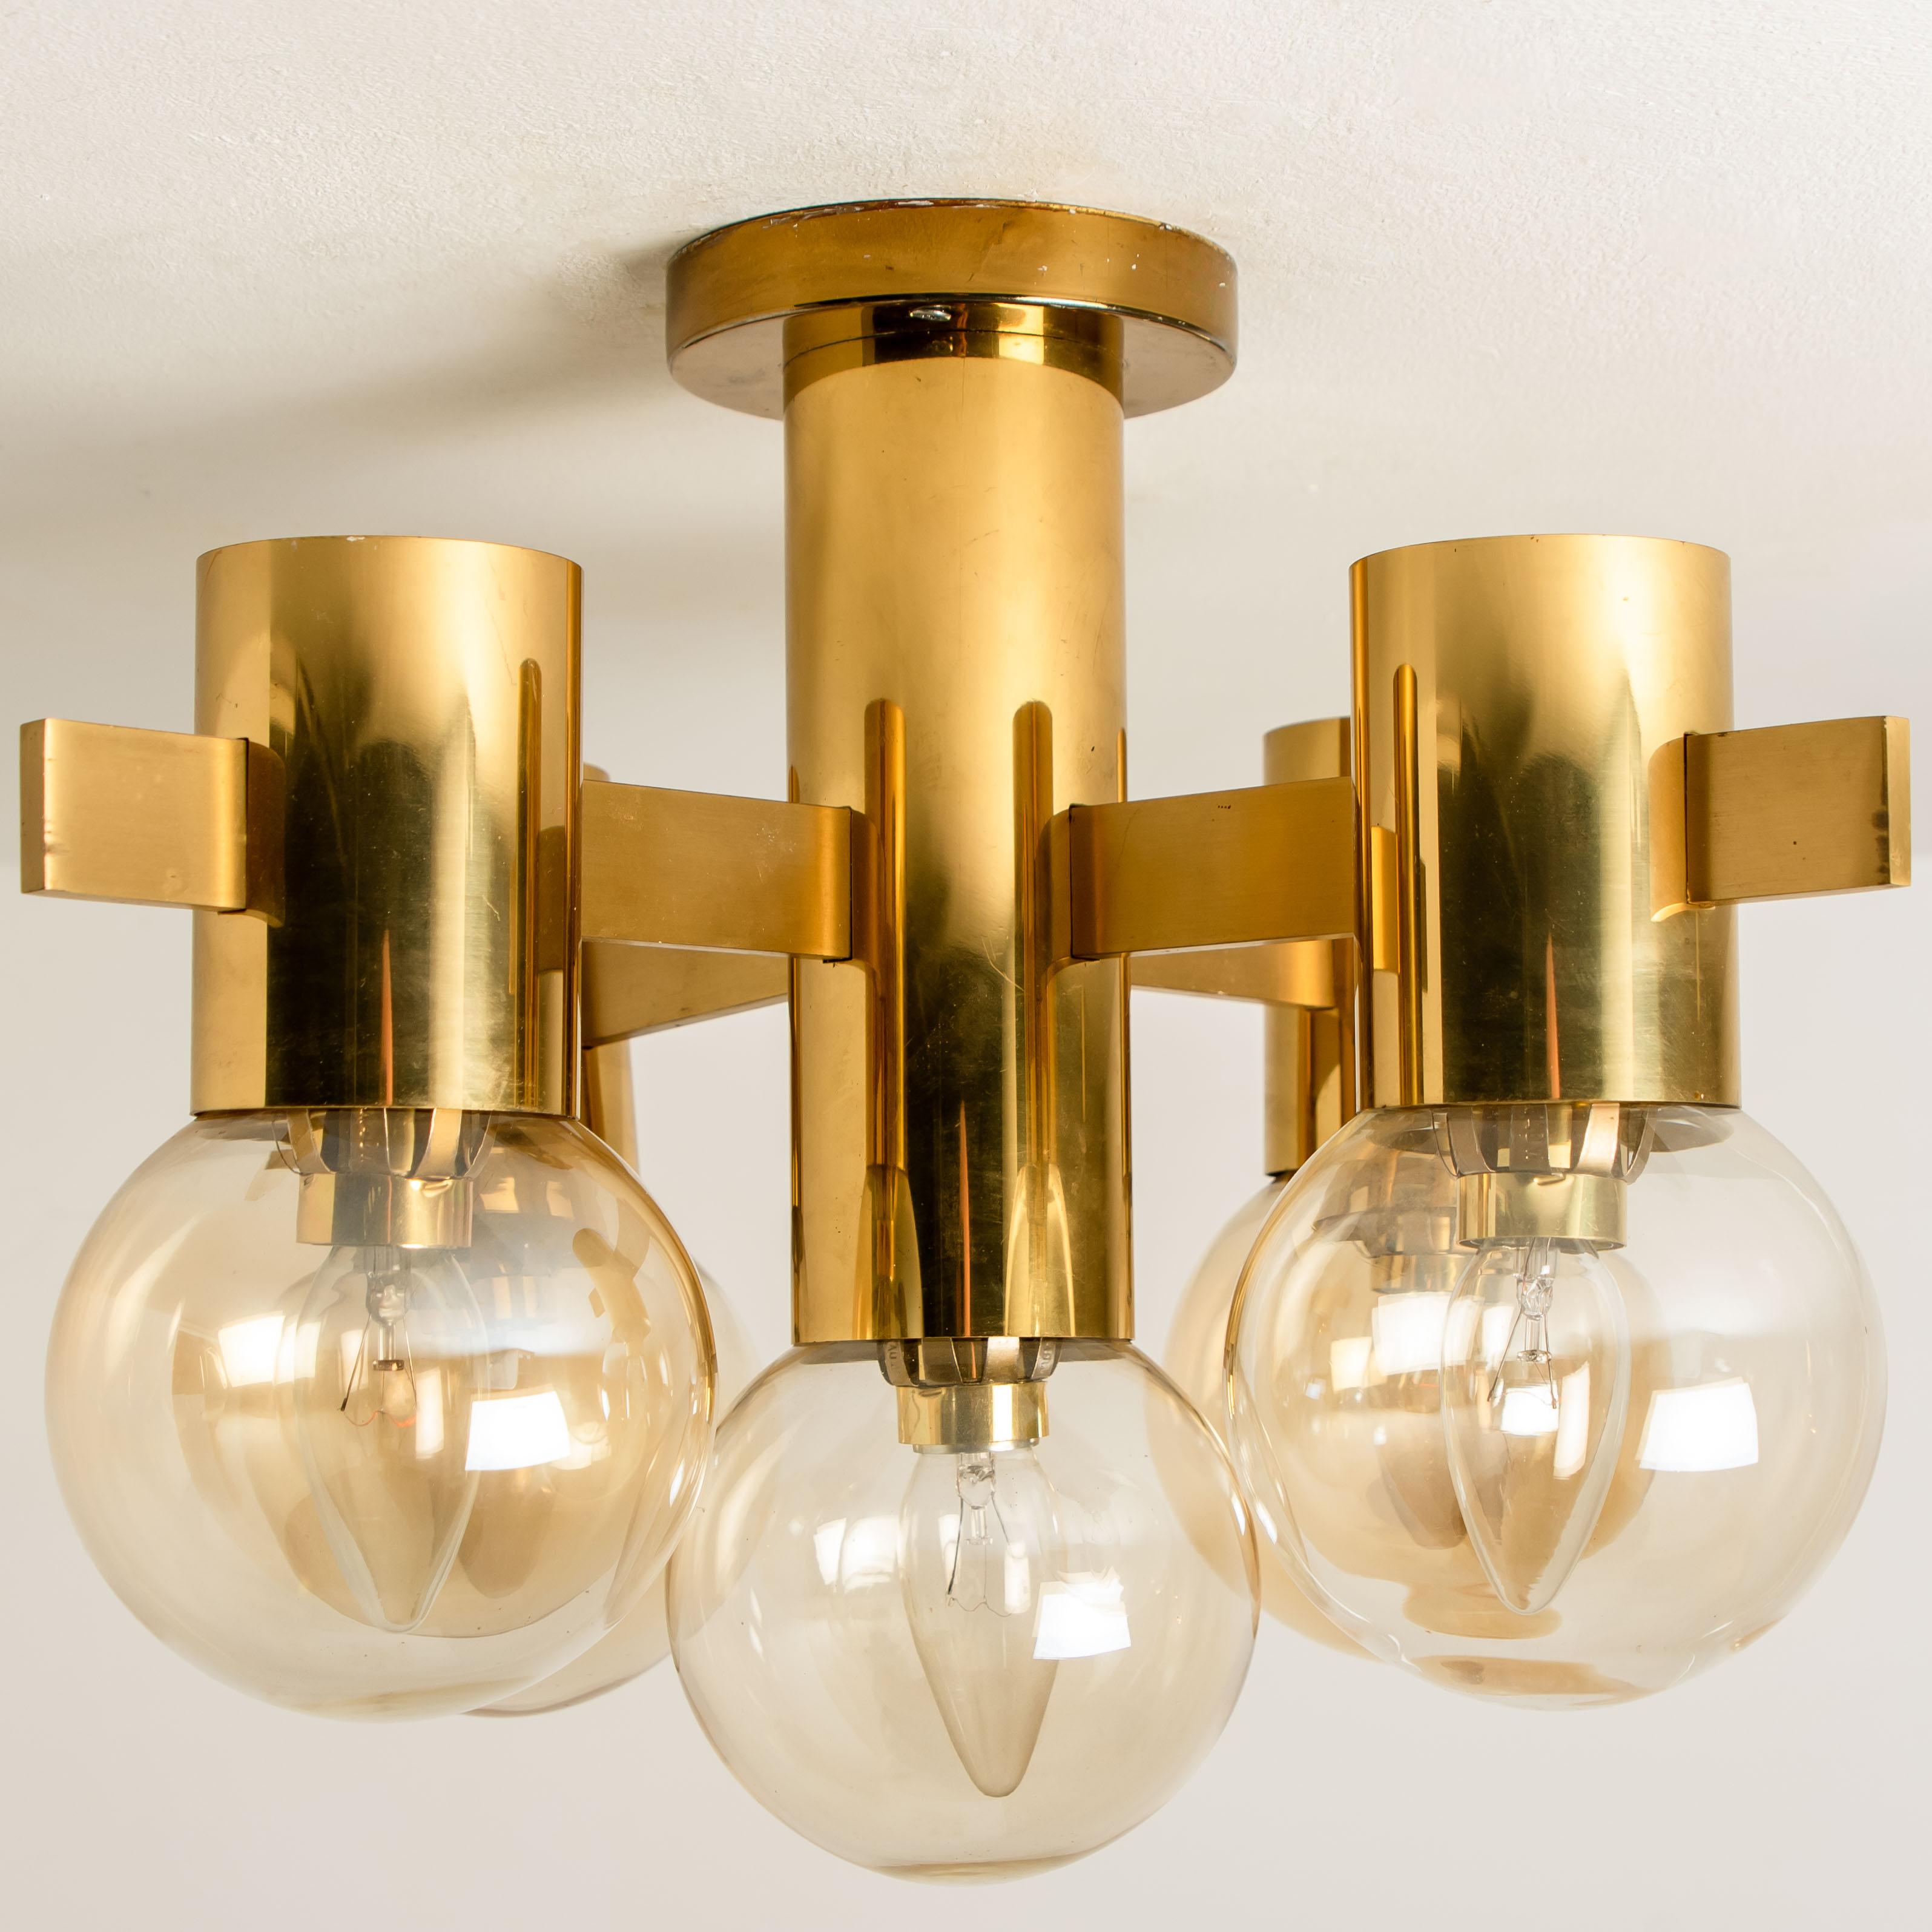 Pair of Brass and Glass Light Fixtures in the Style of Jakobsson, 1960s For Sale 3